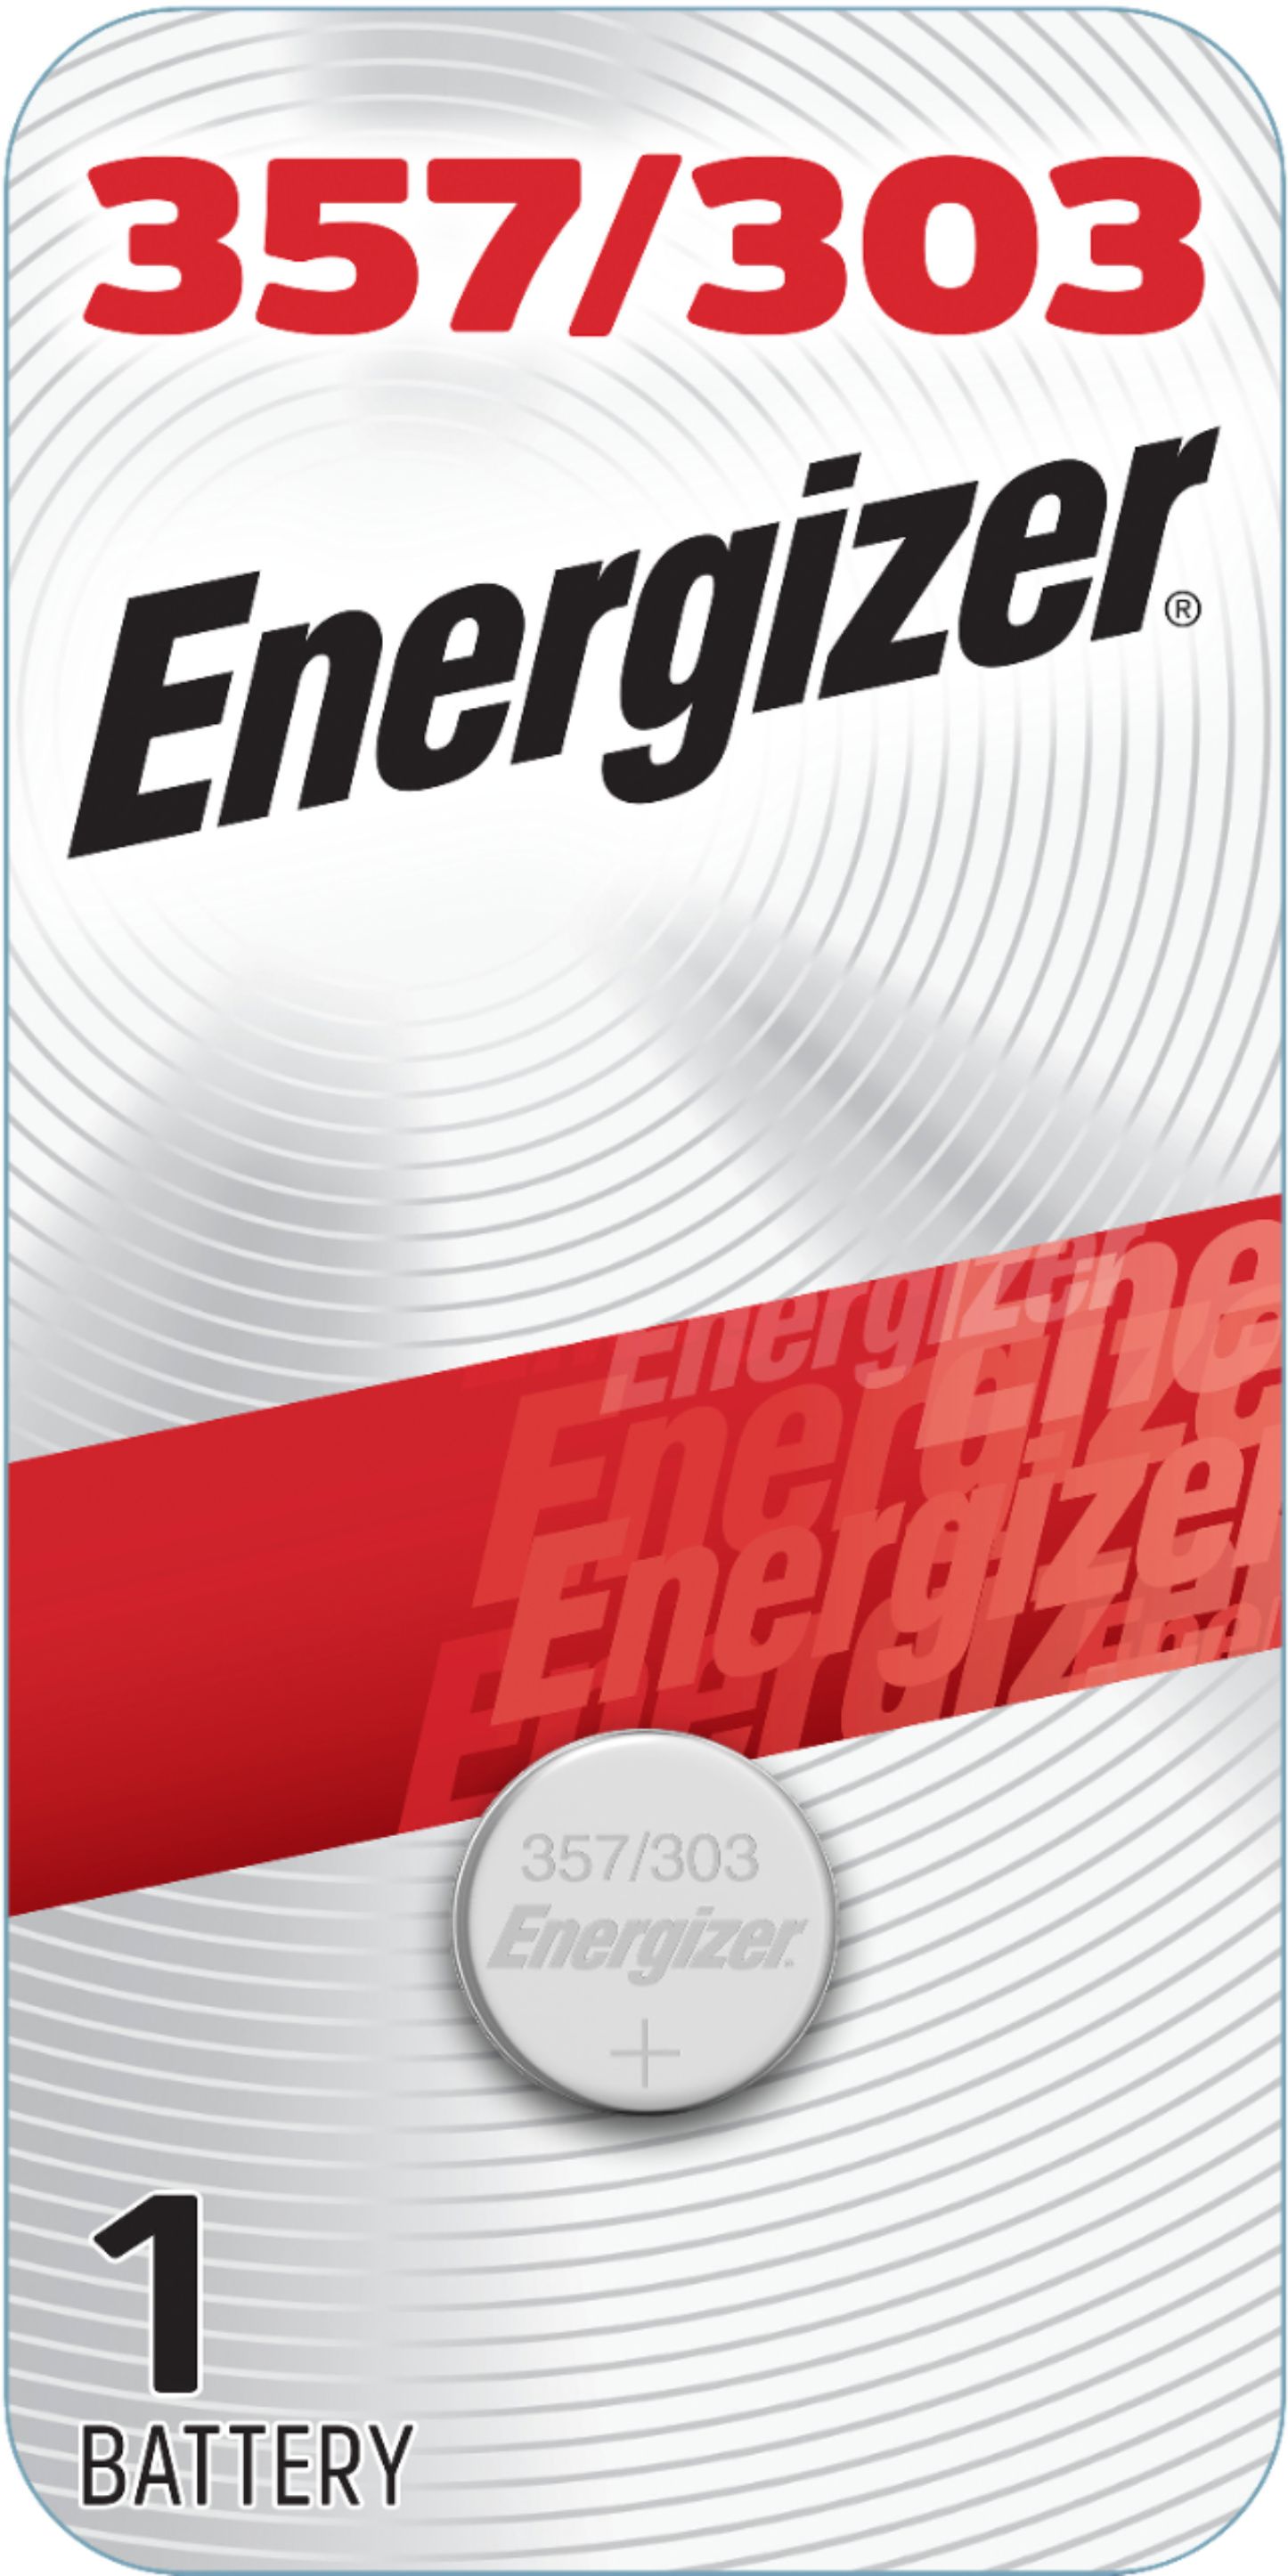 Energizer LR44 Battery, Silver Oxide 303, 357, AG13, or SR44 1.5 Volt  Batteries 3 Count - Packaging May Vary